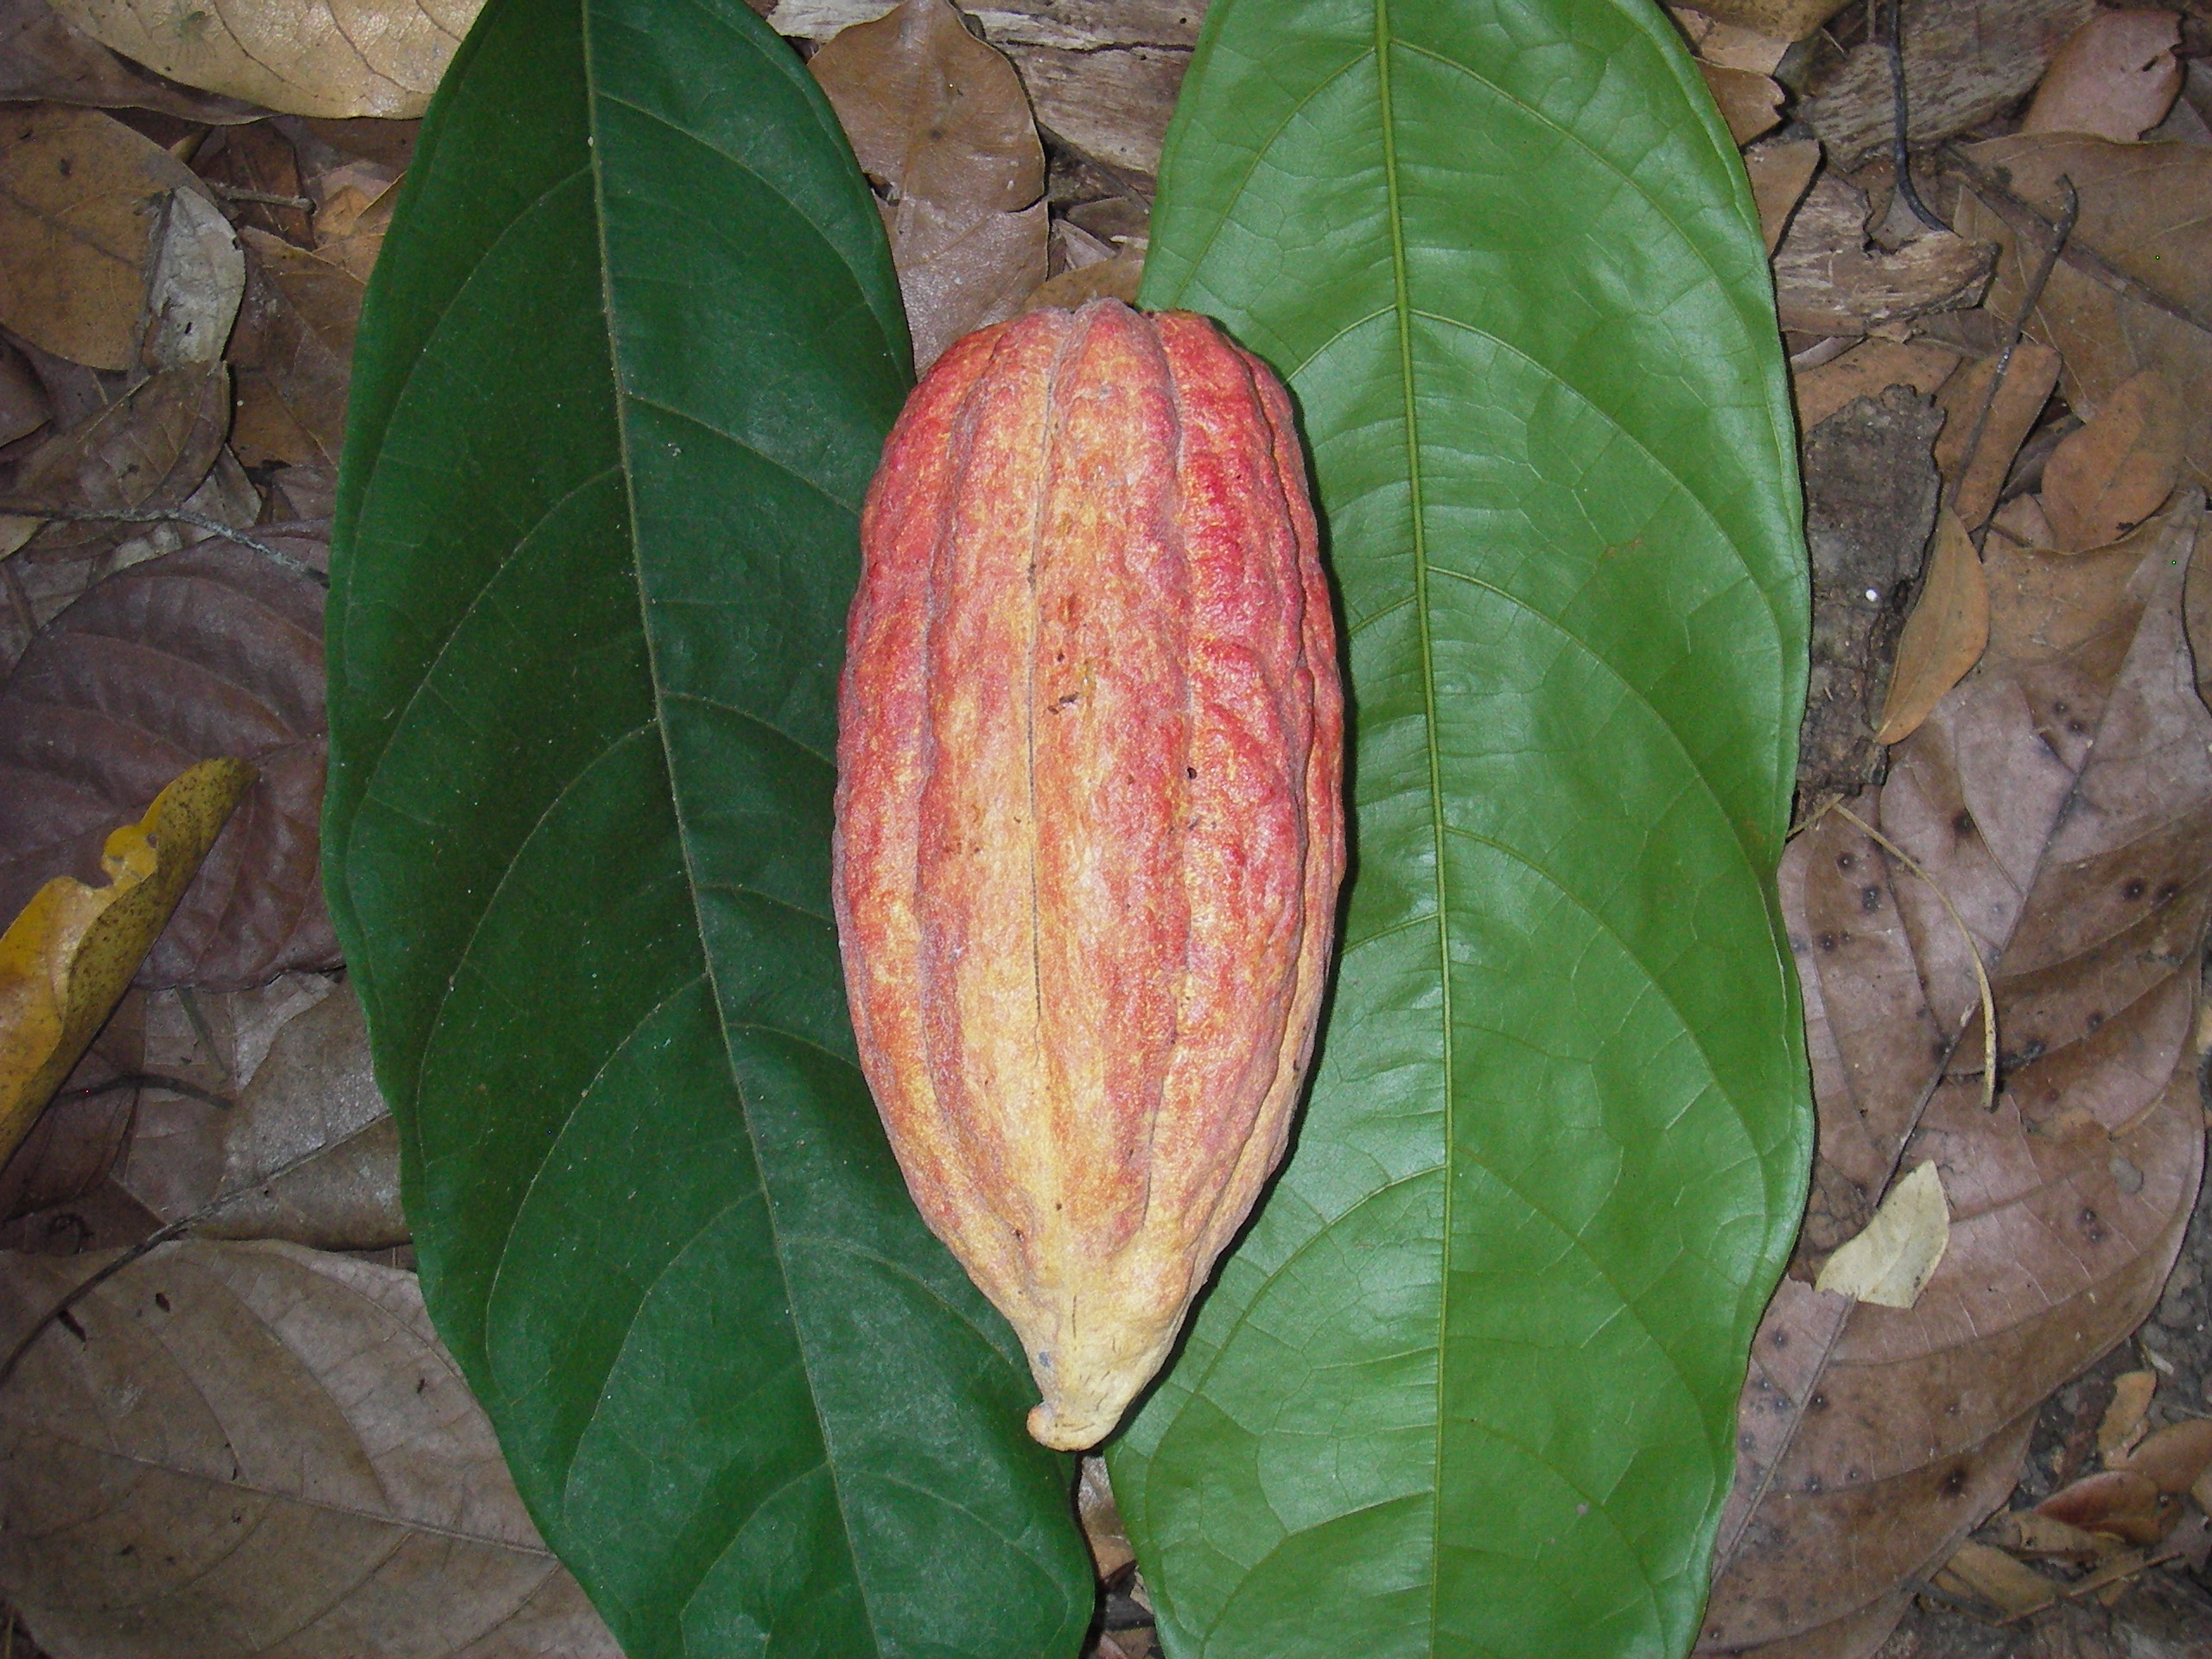 Leaves and pod